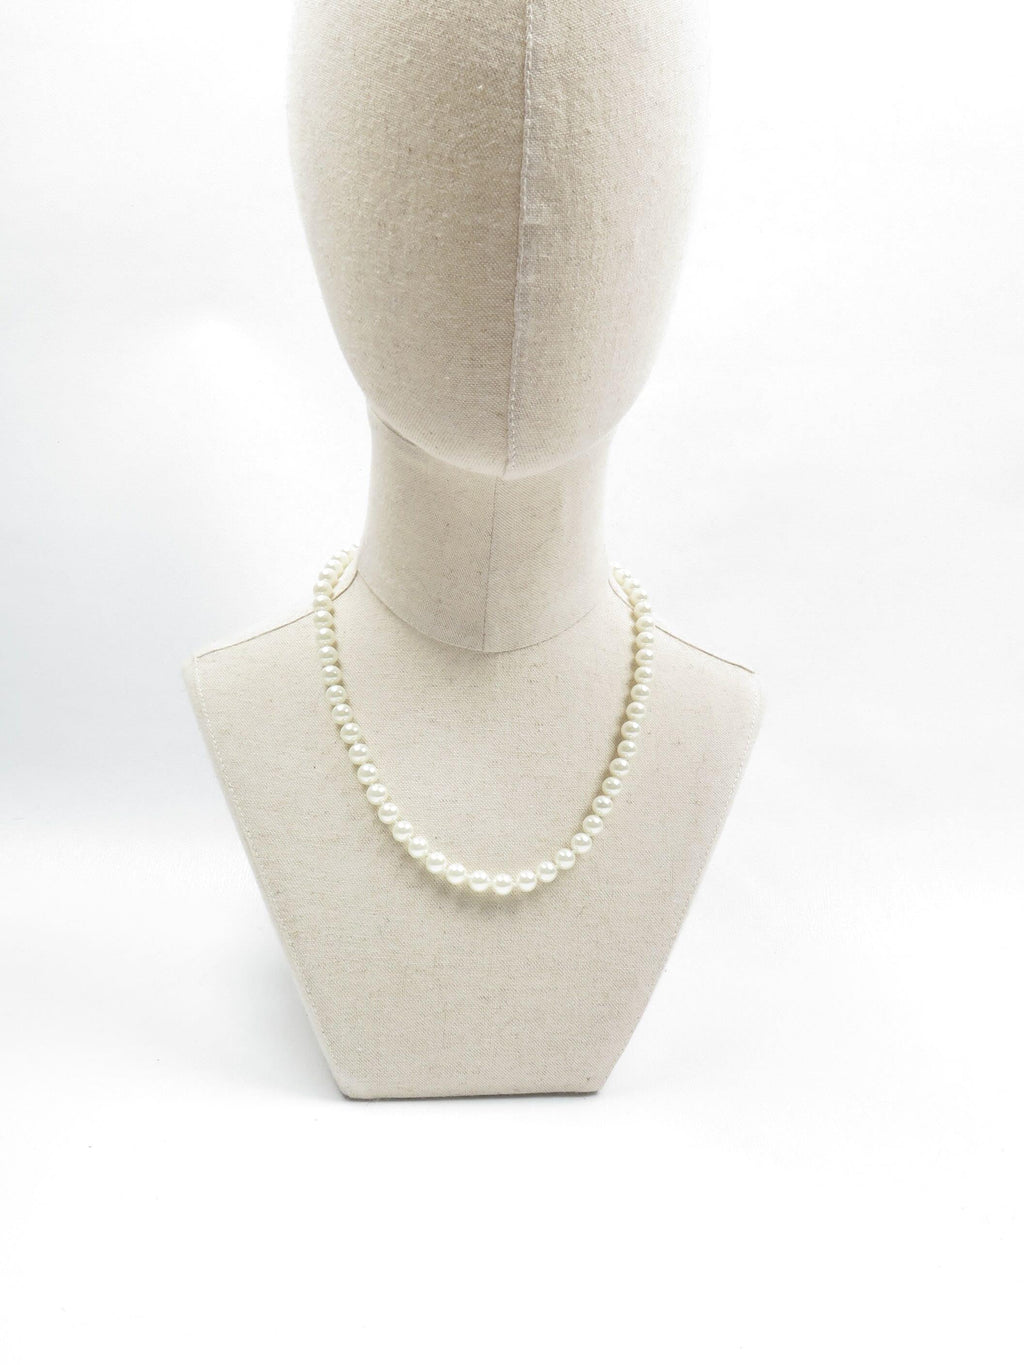 New Short Vintage Style Pearl Necklace - The Harlequin